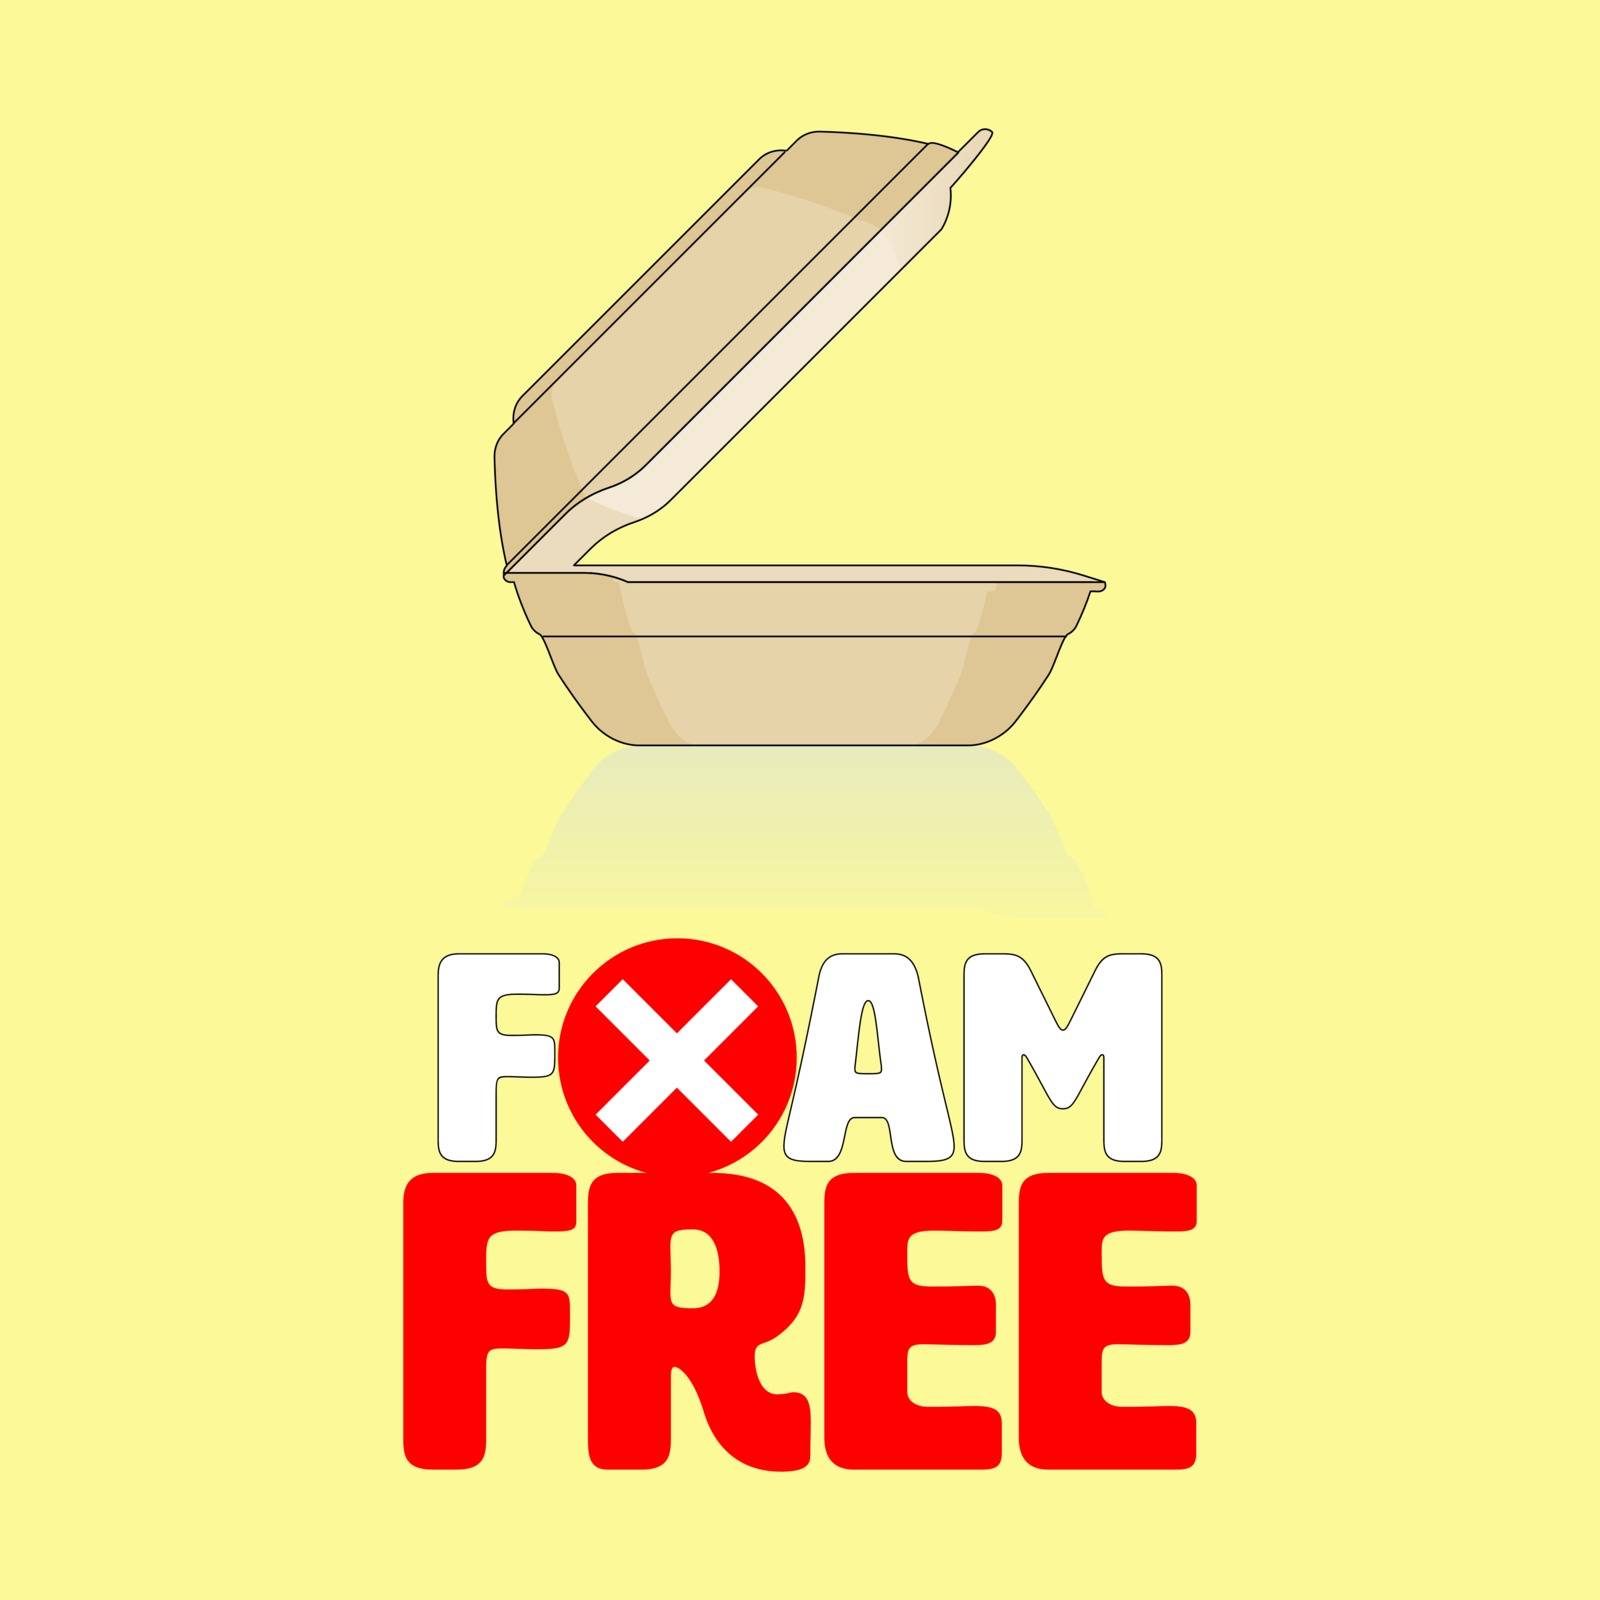 Outline flat icon of styrofoam container with ban cross symbol gimmick typographic design. Foam free concept. Vector illustration.